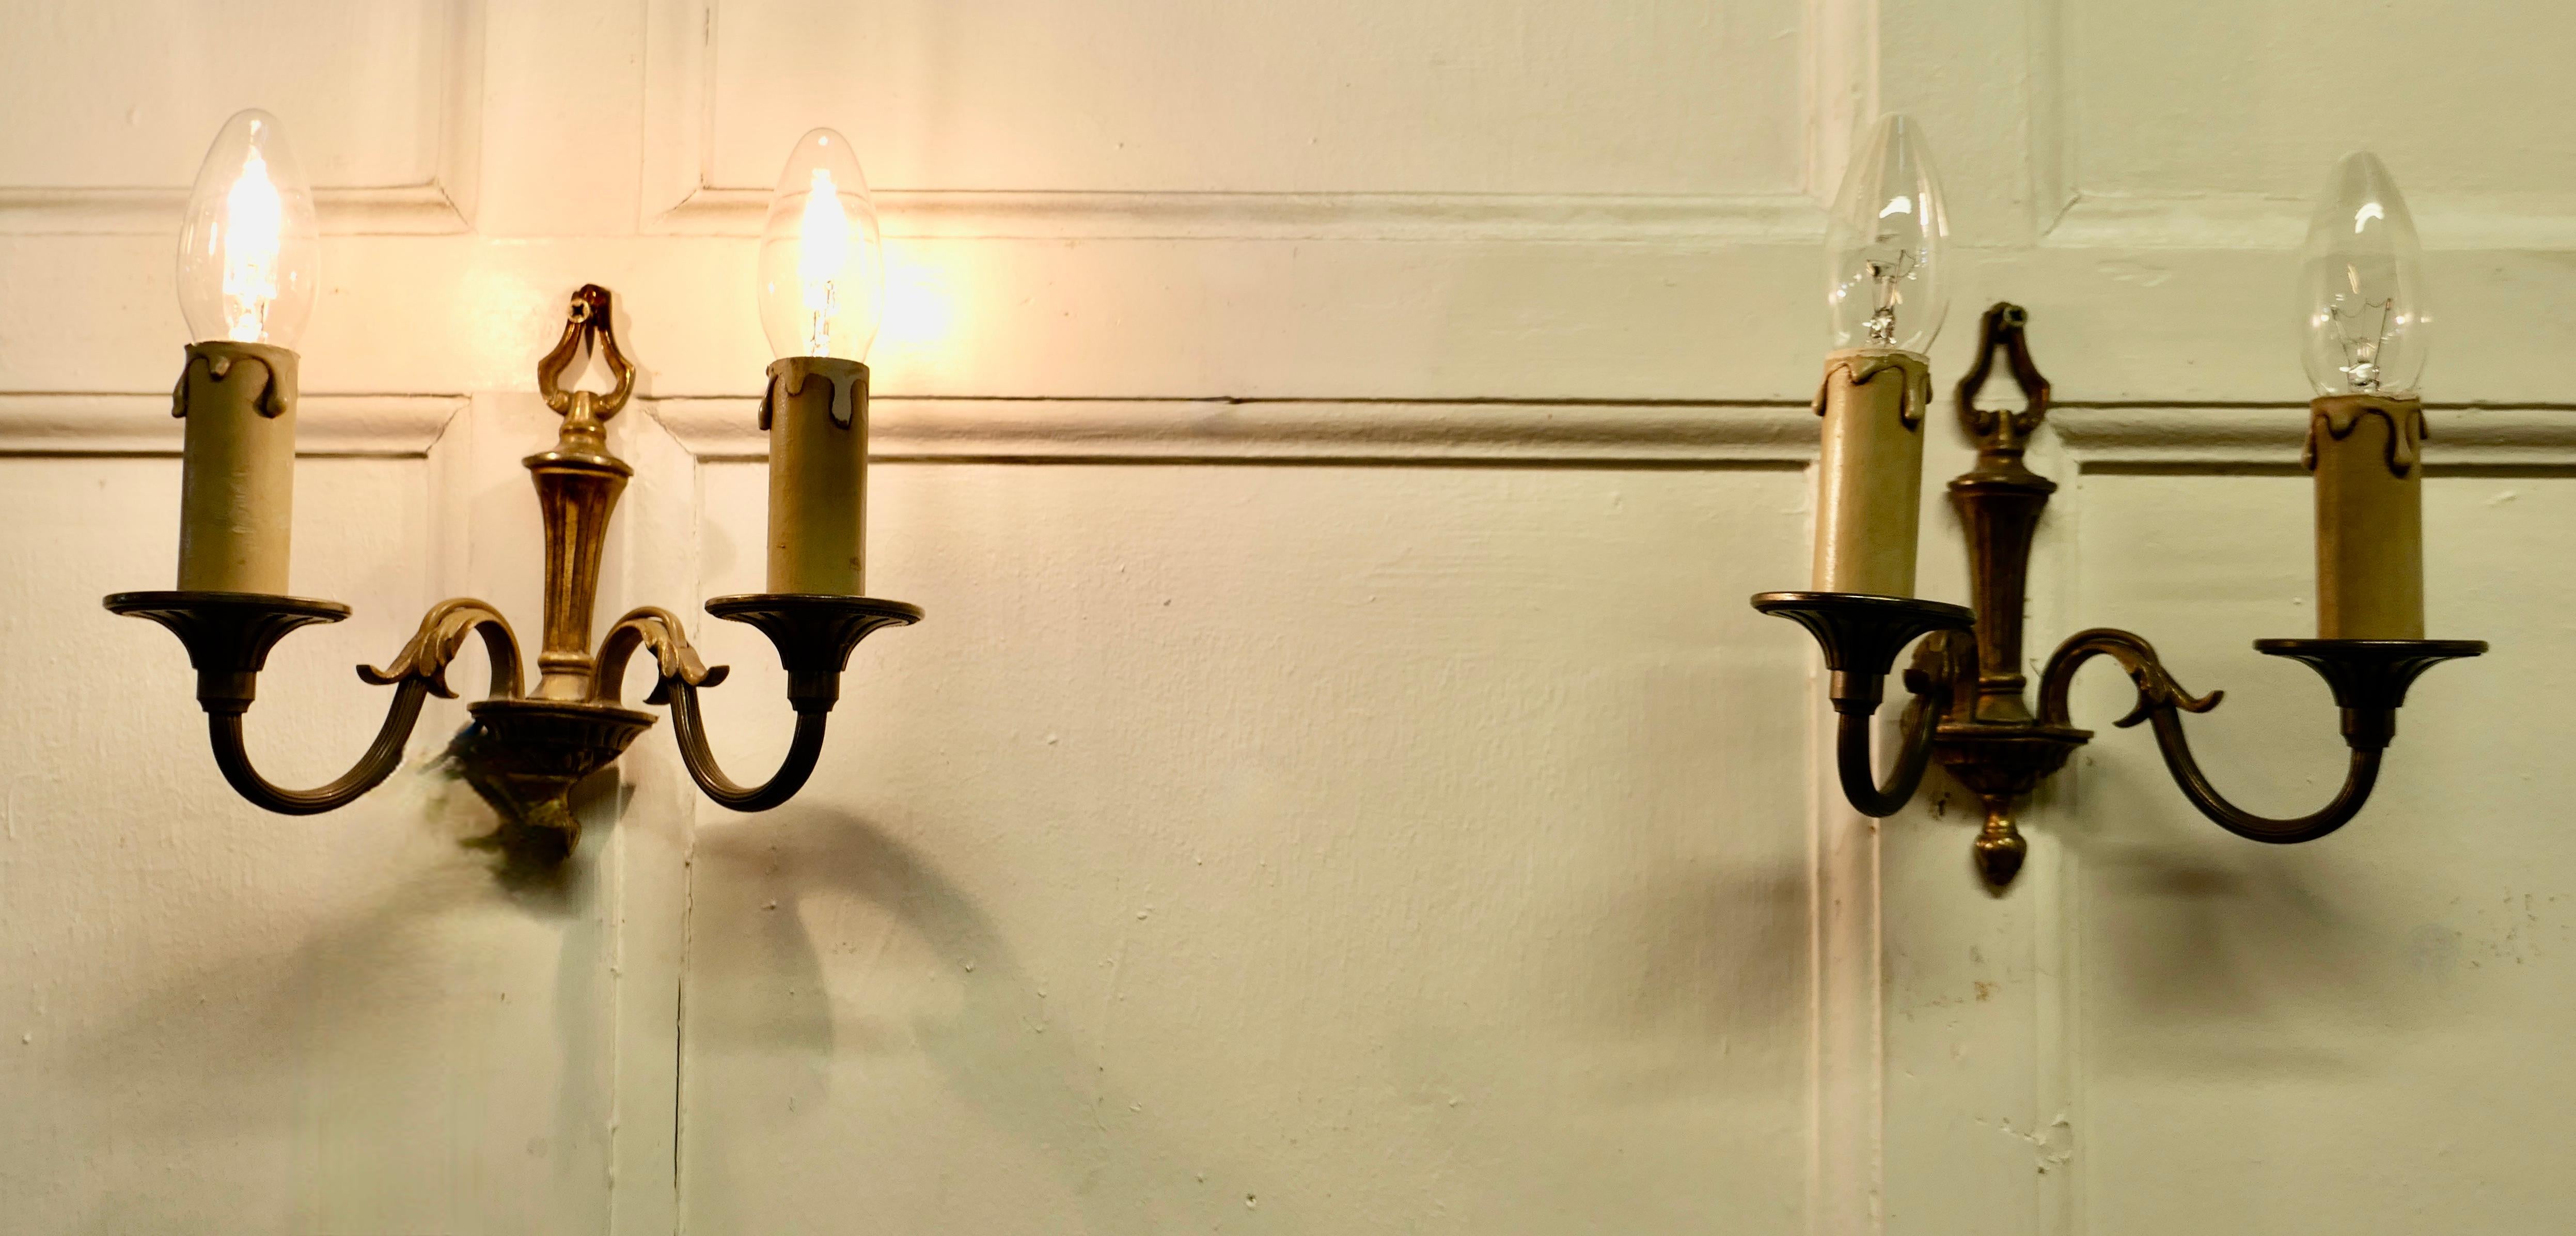 A pair of French brass twinwall lights


This is a very attractive pair of lights they each have 2 sconces 

The lights are in good vintage condition and working, they will have to be installed by an electrician

The lights are 7” tall, 9”